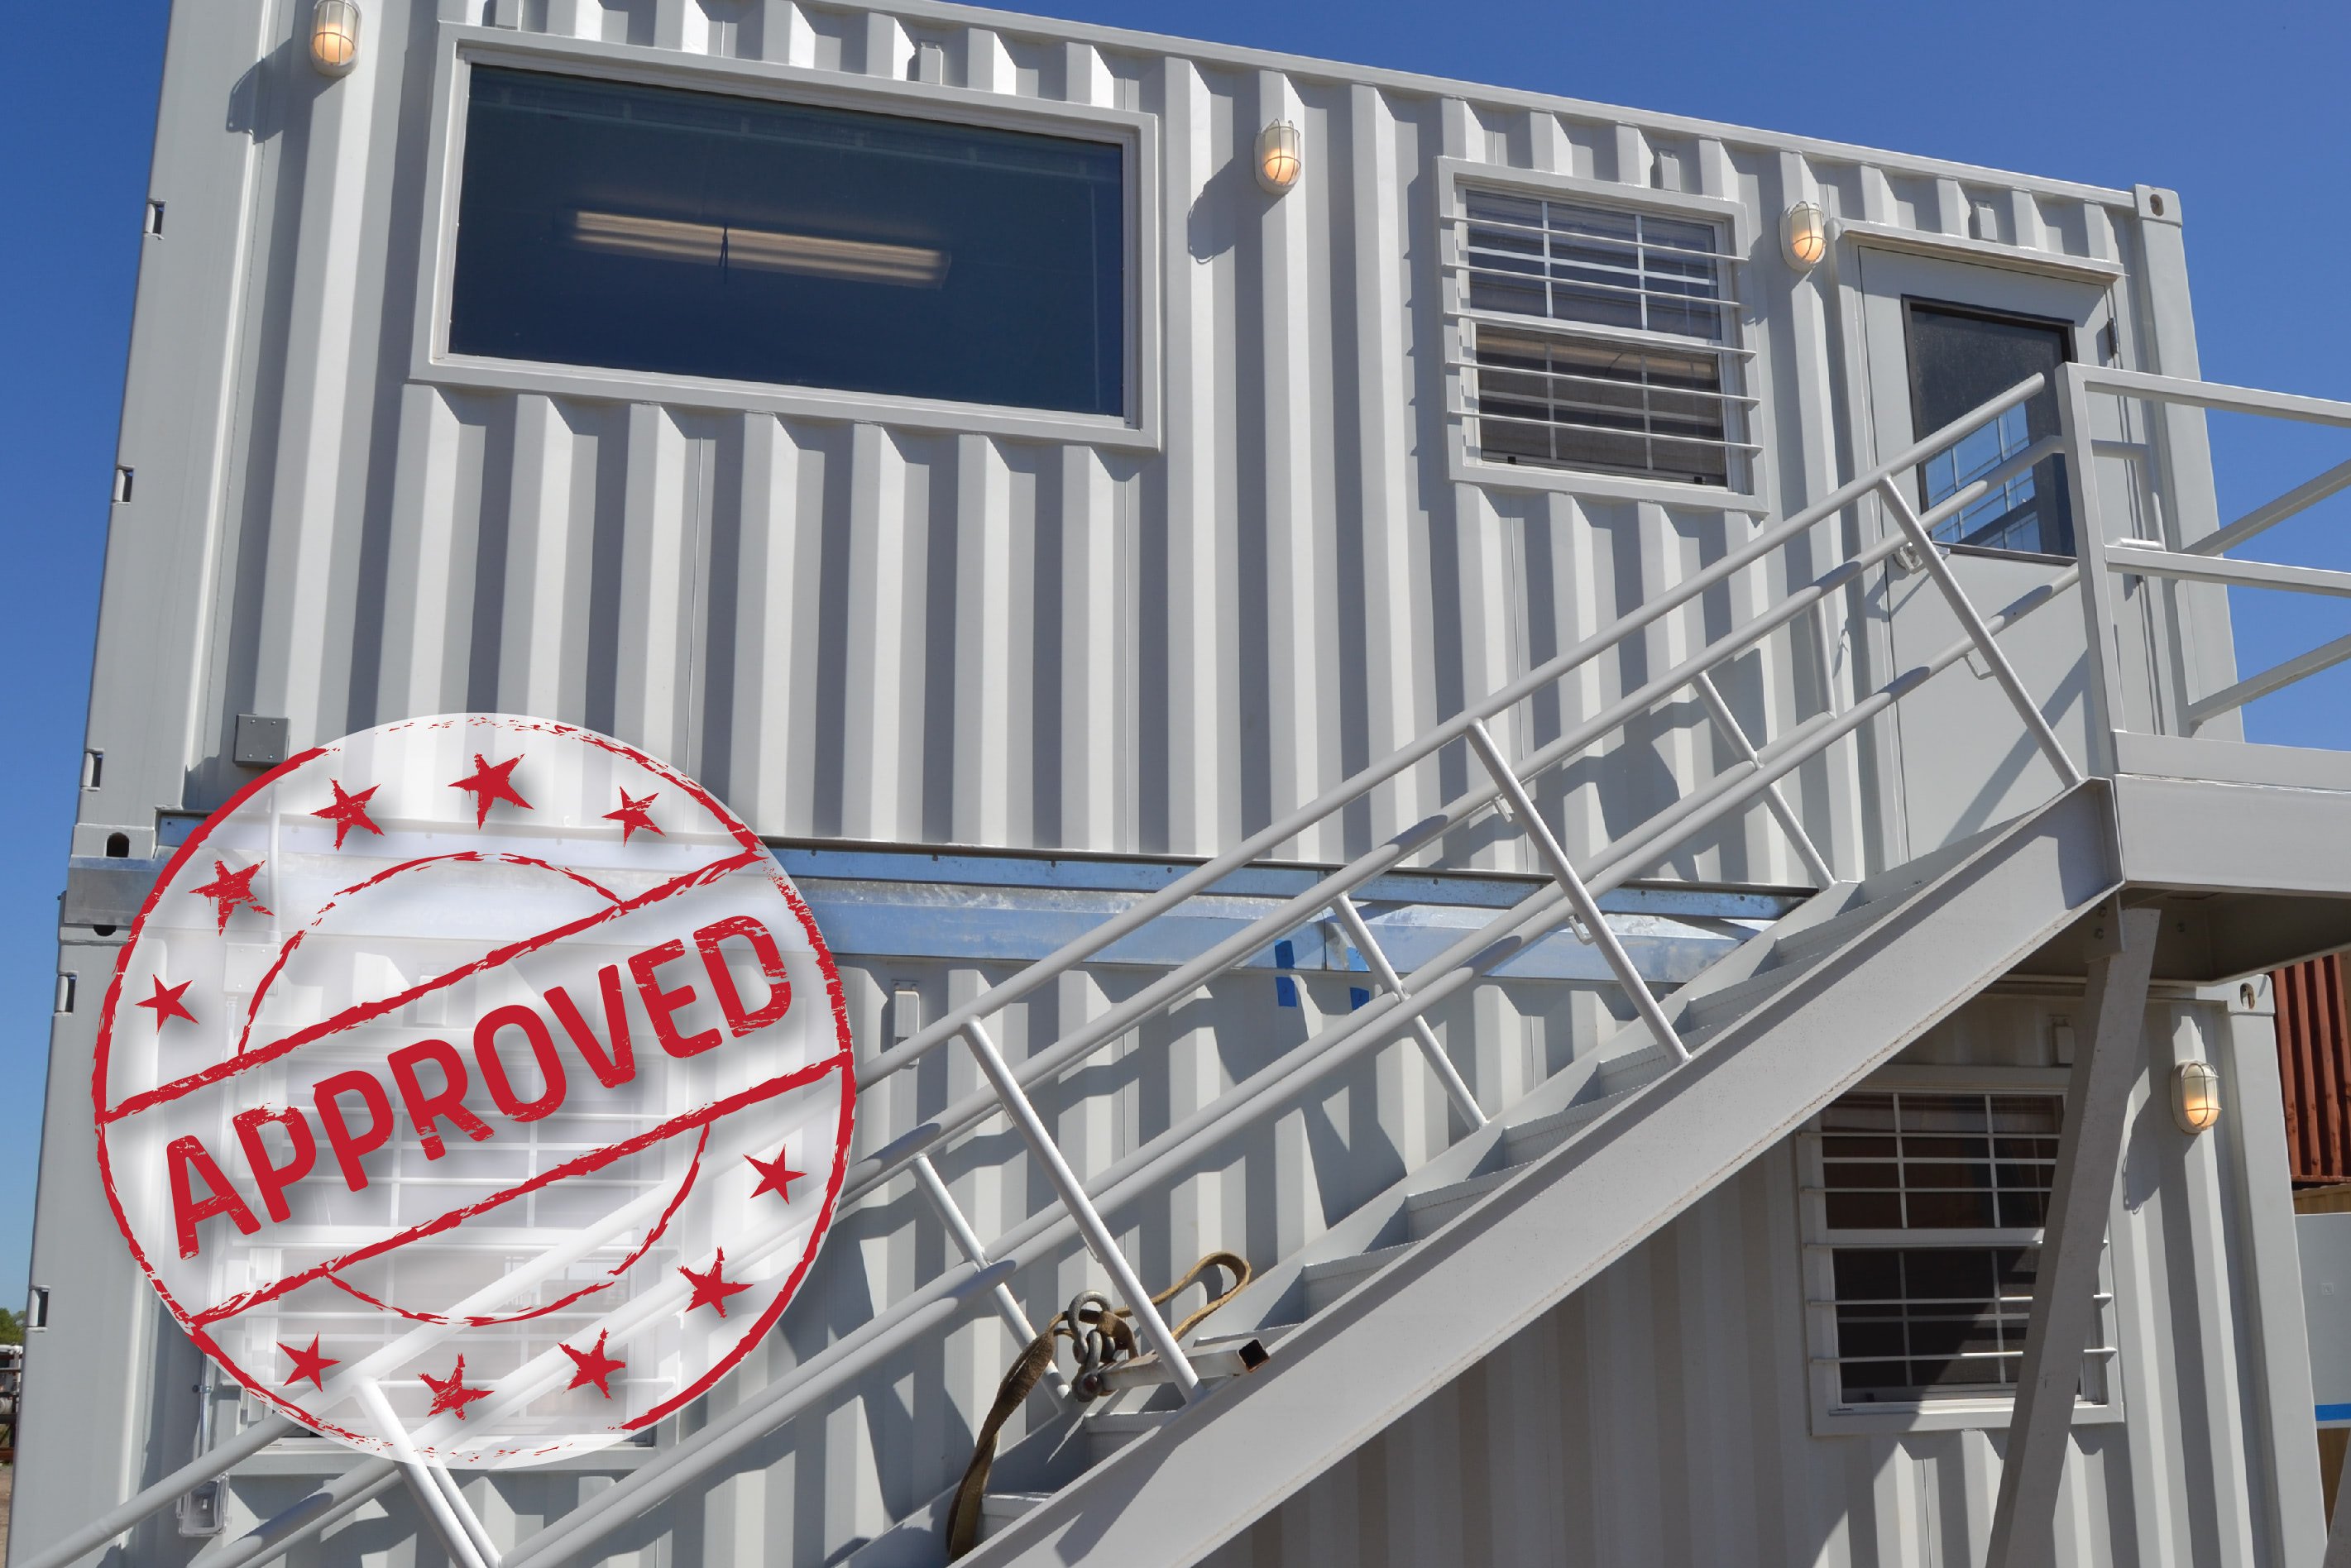 Shipping Containers are Joining Building Code. Now What?